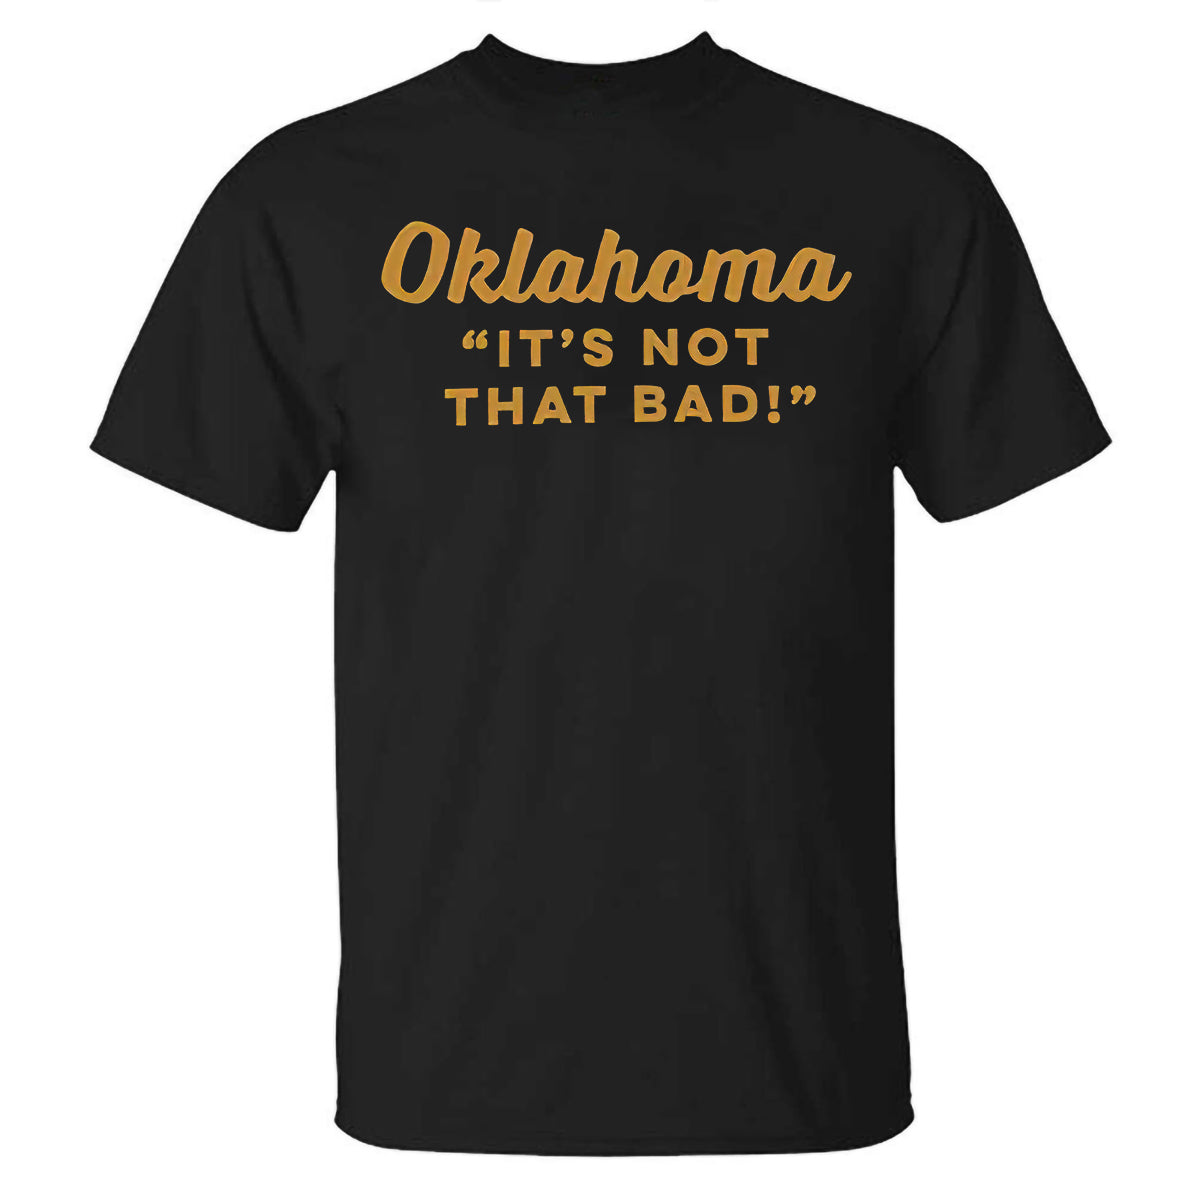 Oklahoma is not that bad Printed Casual T-shirt